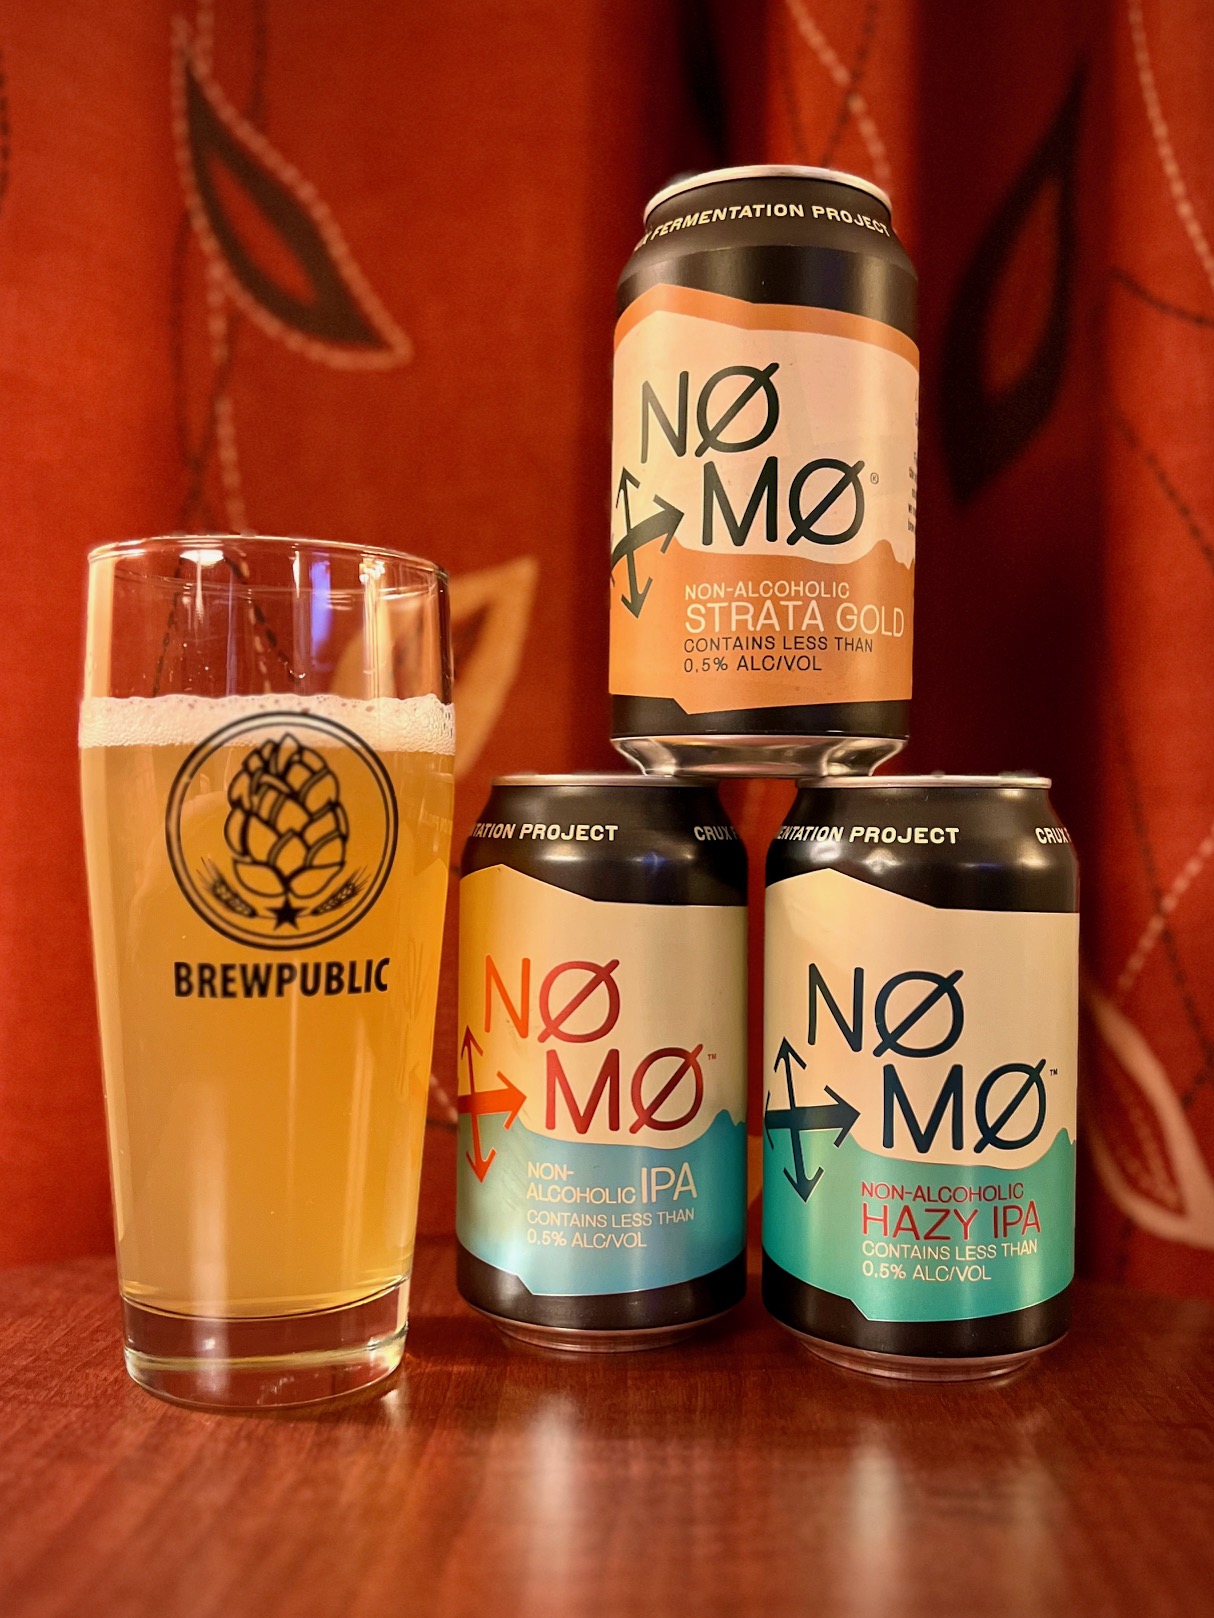 Crux Fermentation Project line up of non-alcoholic beers includes the new NØ MØ NA Strata Gold joining NA IPA and NA Hazy IPA.